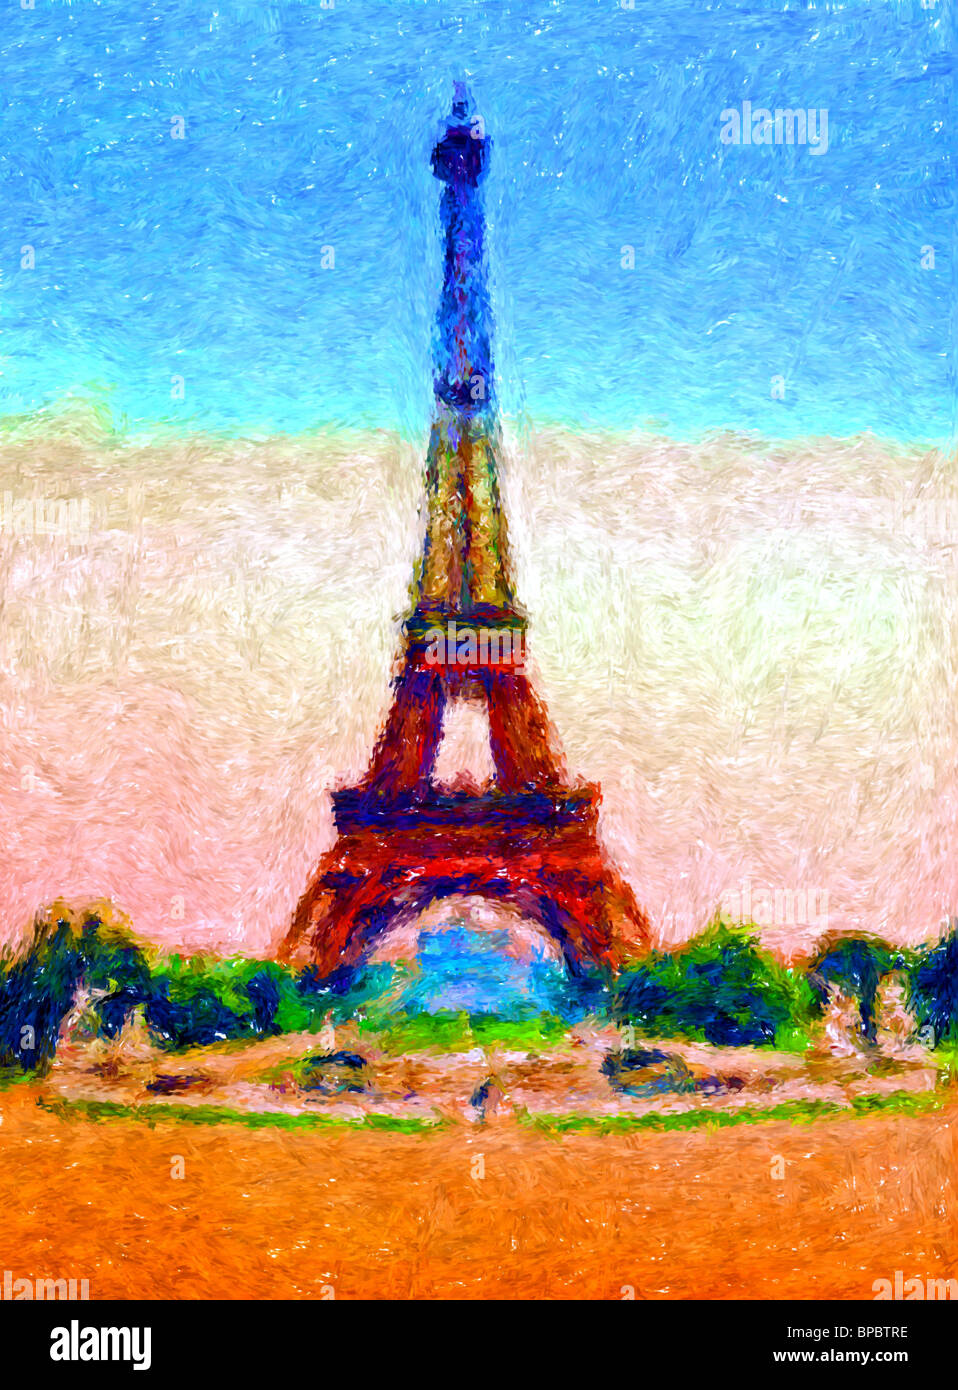 Impressionist style painting of Eiffel Tower Paris France Stock Photo